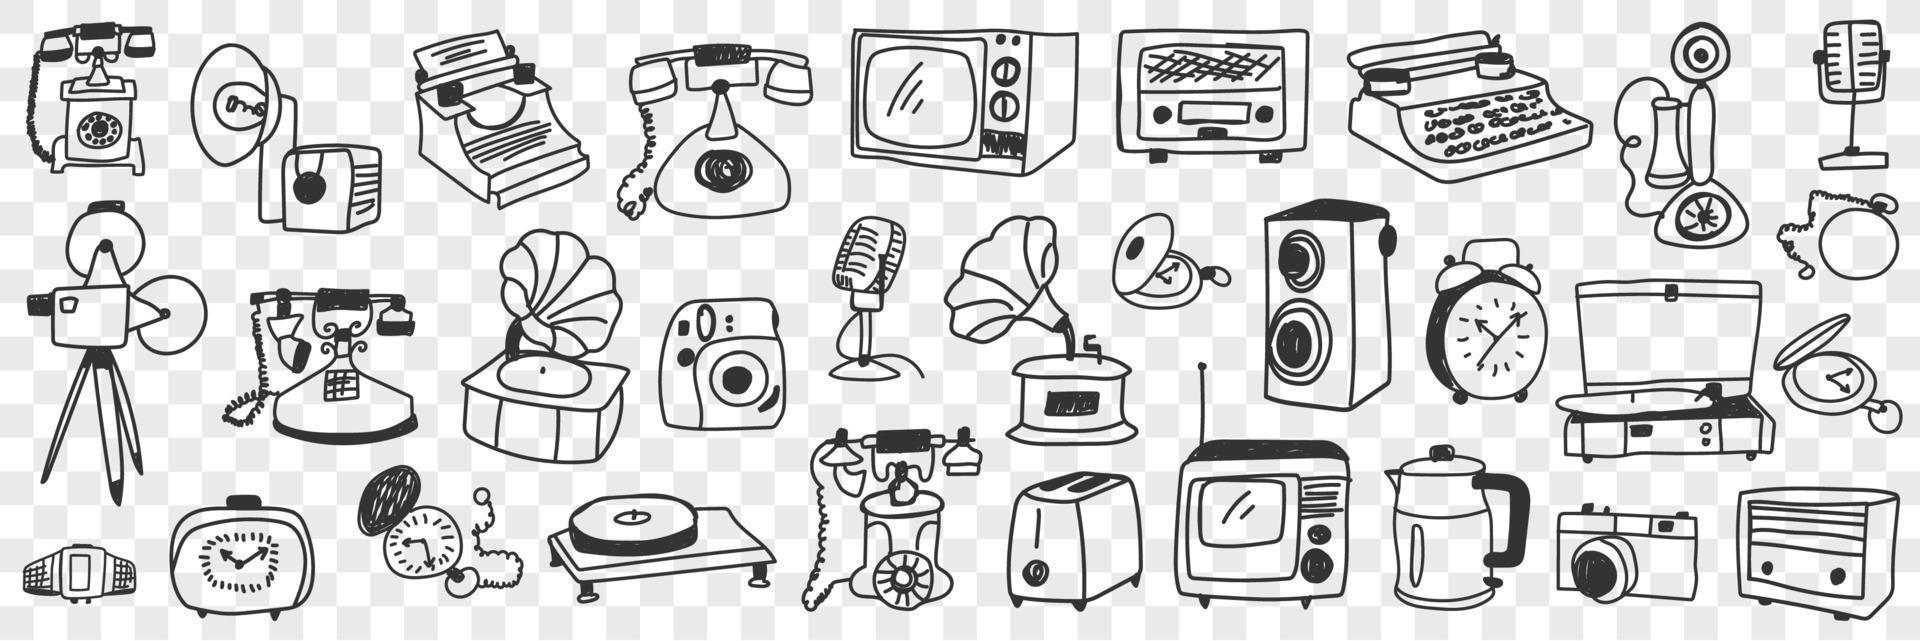 Retro and modern technical appliances doodle set. Collection of hand drawn various telephone teapot kettle television toaster electronic devices in rows isolated on transparent background vector